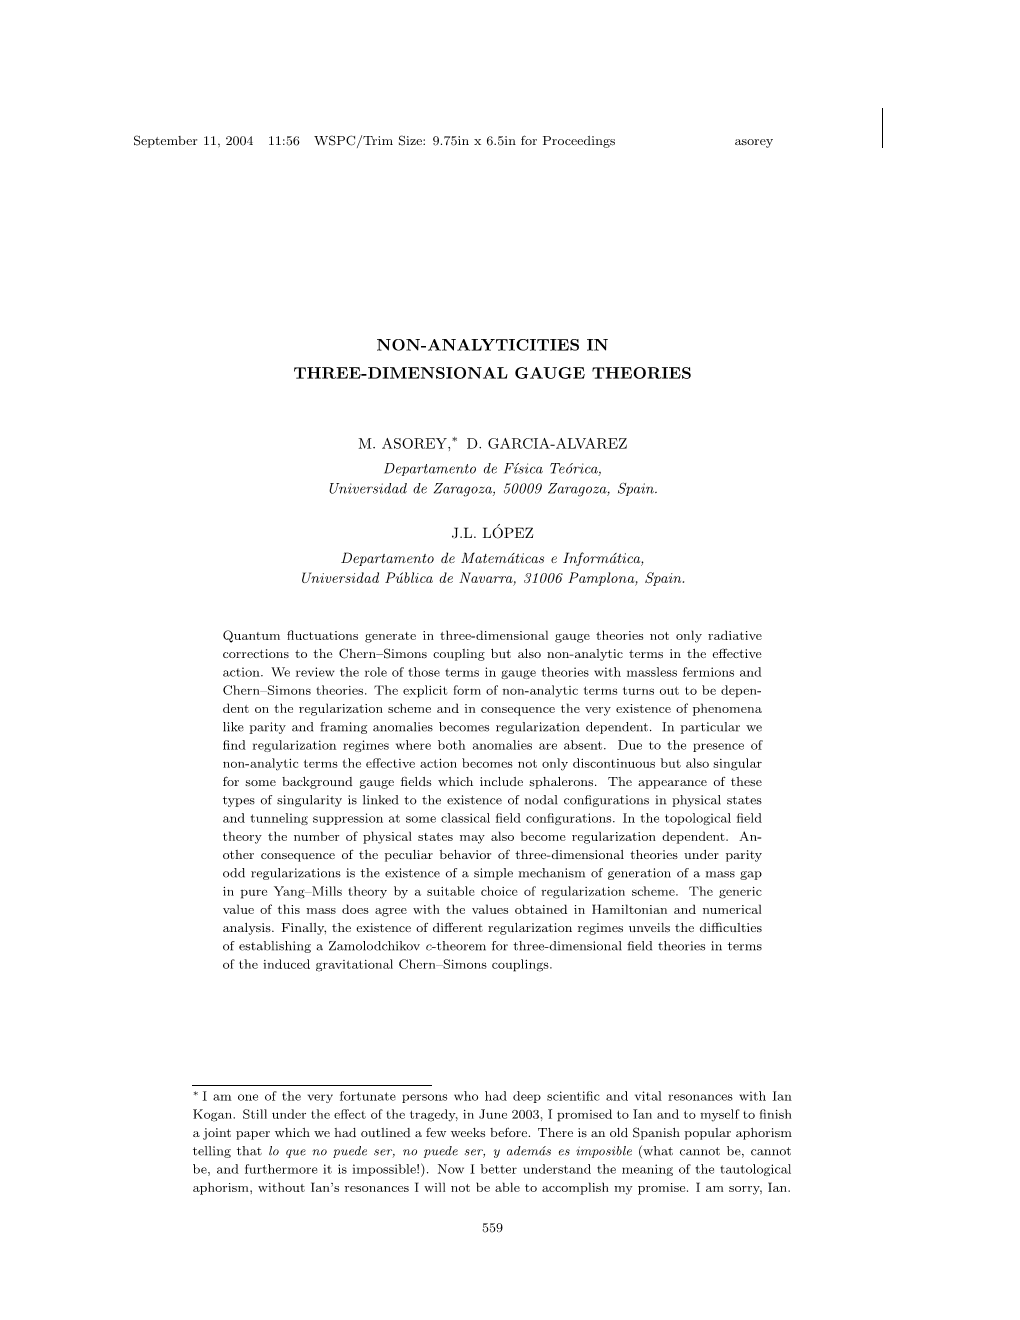 Non-Analyticities in Three-Dimensional Gauge Theories